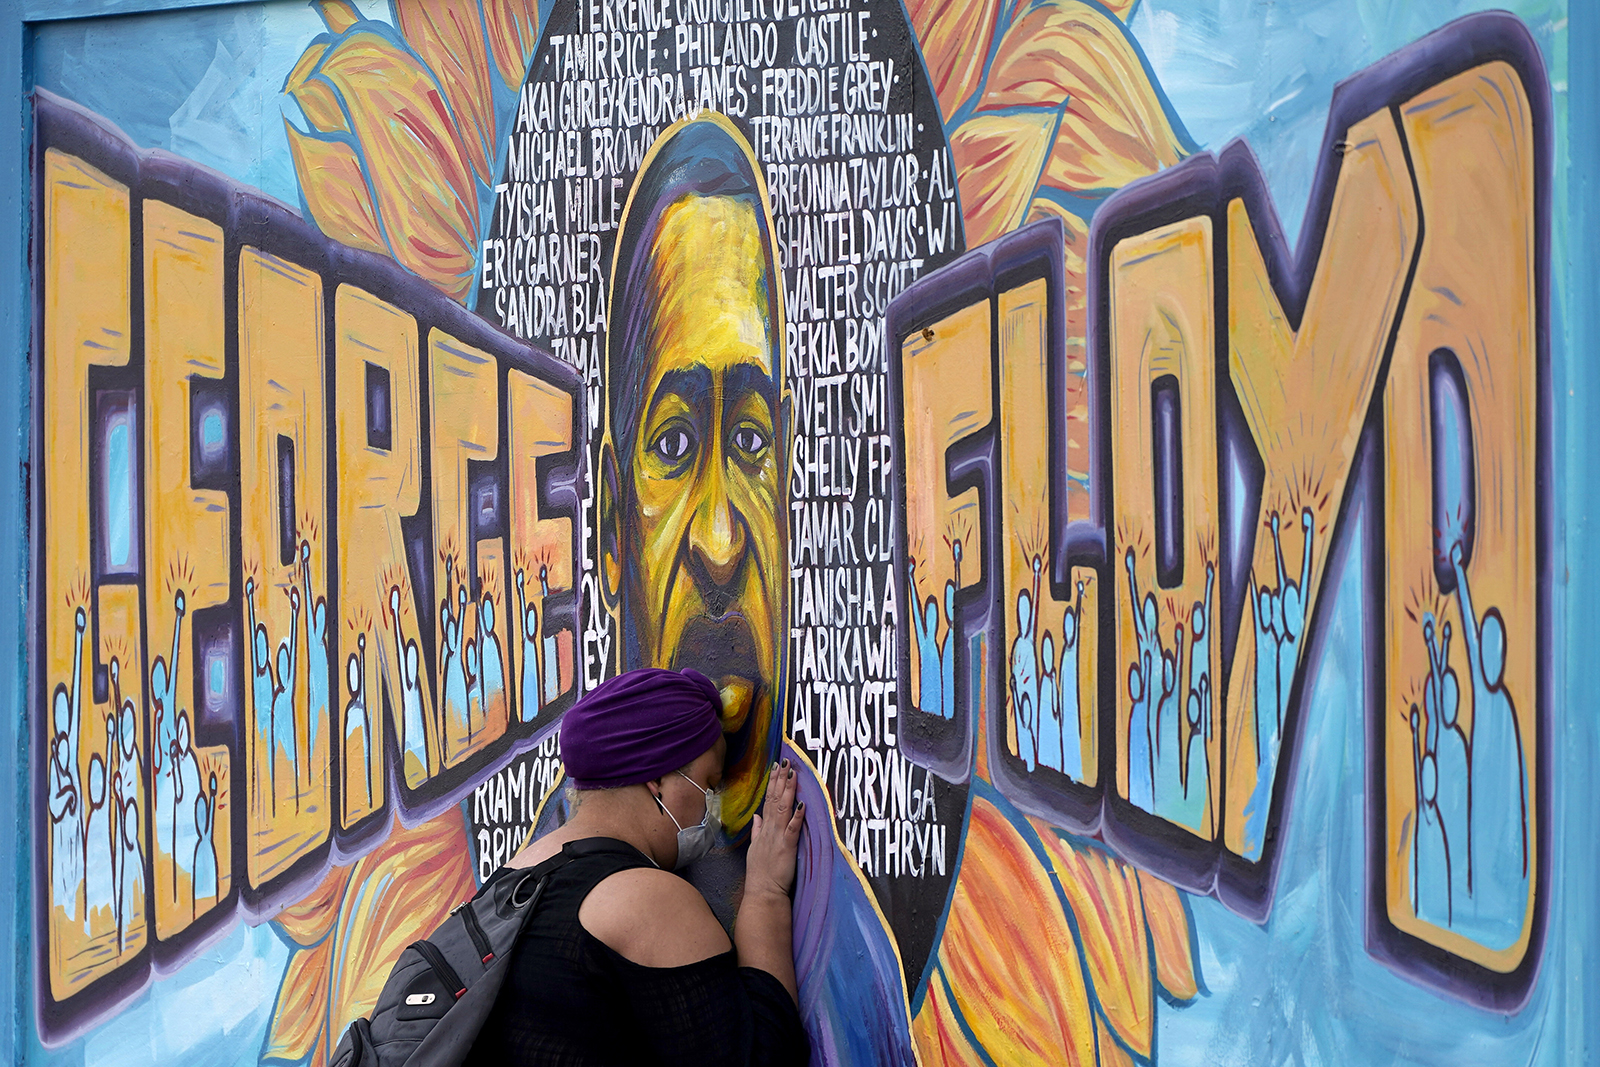 Damarra Atkins pays her respects to George Floyd at a mural at George Floyd Square on April 23, 2021, in Minneapolis. (AP Photo/Julio Cortez)